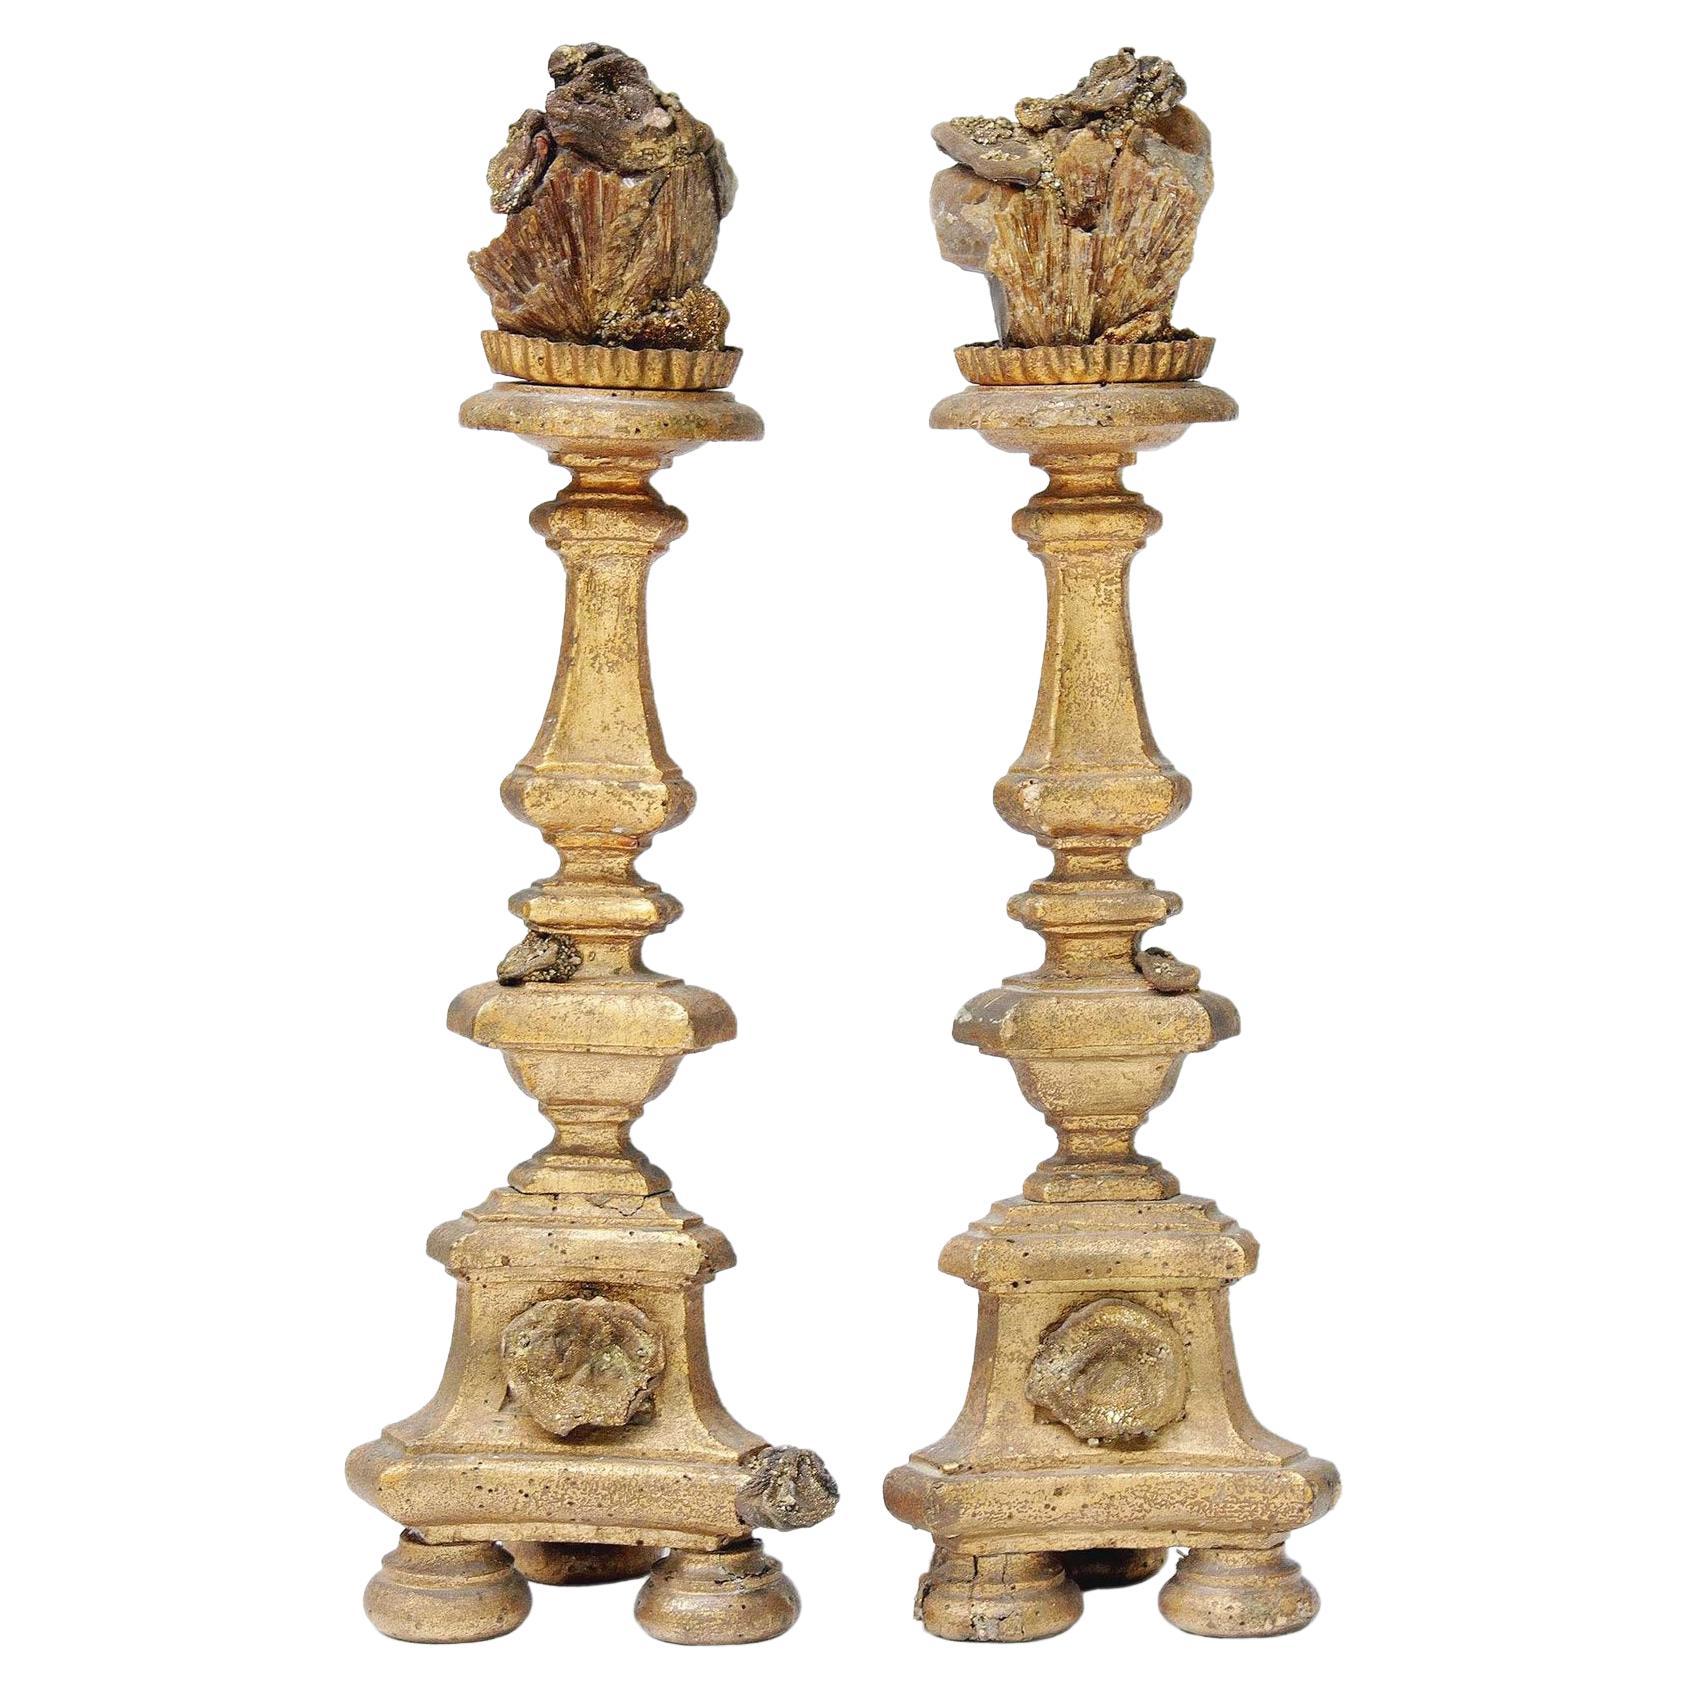 Pair of 18th Century Italian Candlesticks with Chalcedony and Barite Crystals